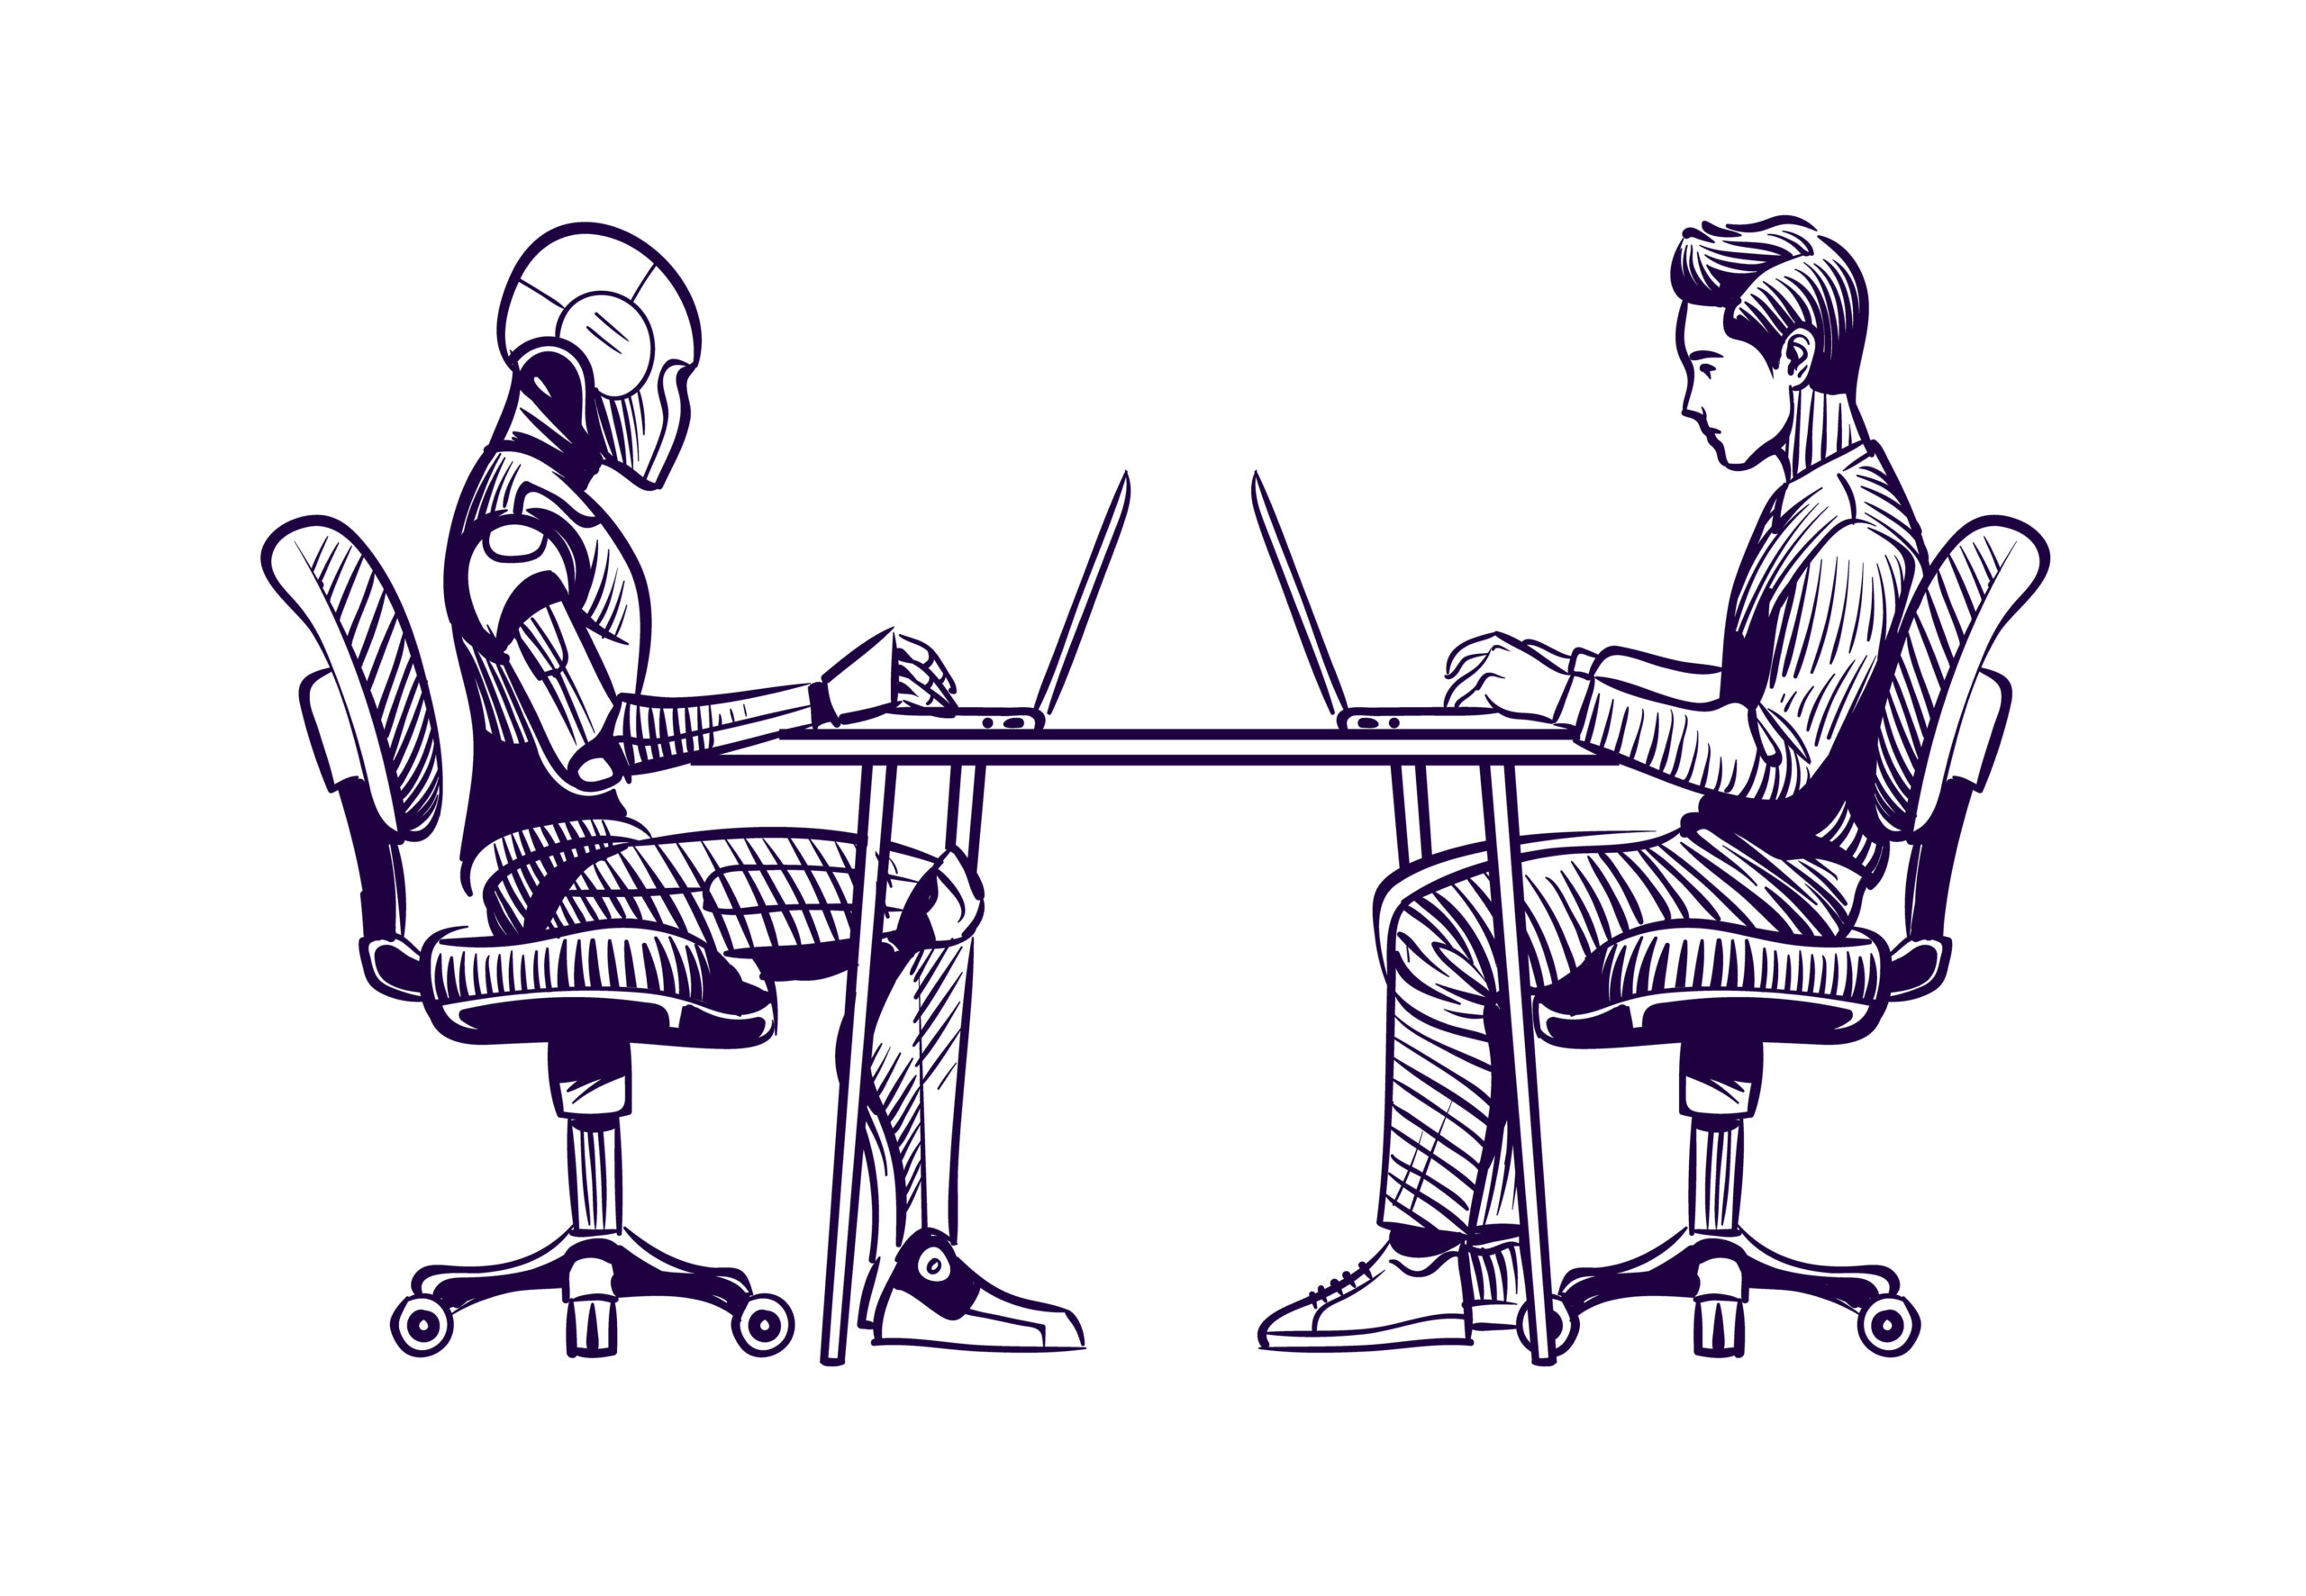 Robot vs man. Human humanoid robot work with laptops at desk. Artificial intelligence, employees replacement sketch vector concept